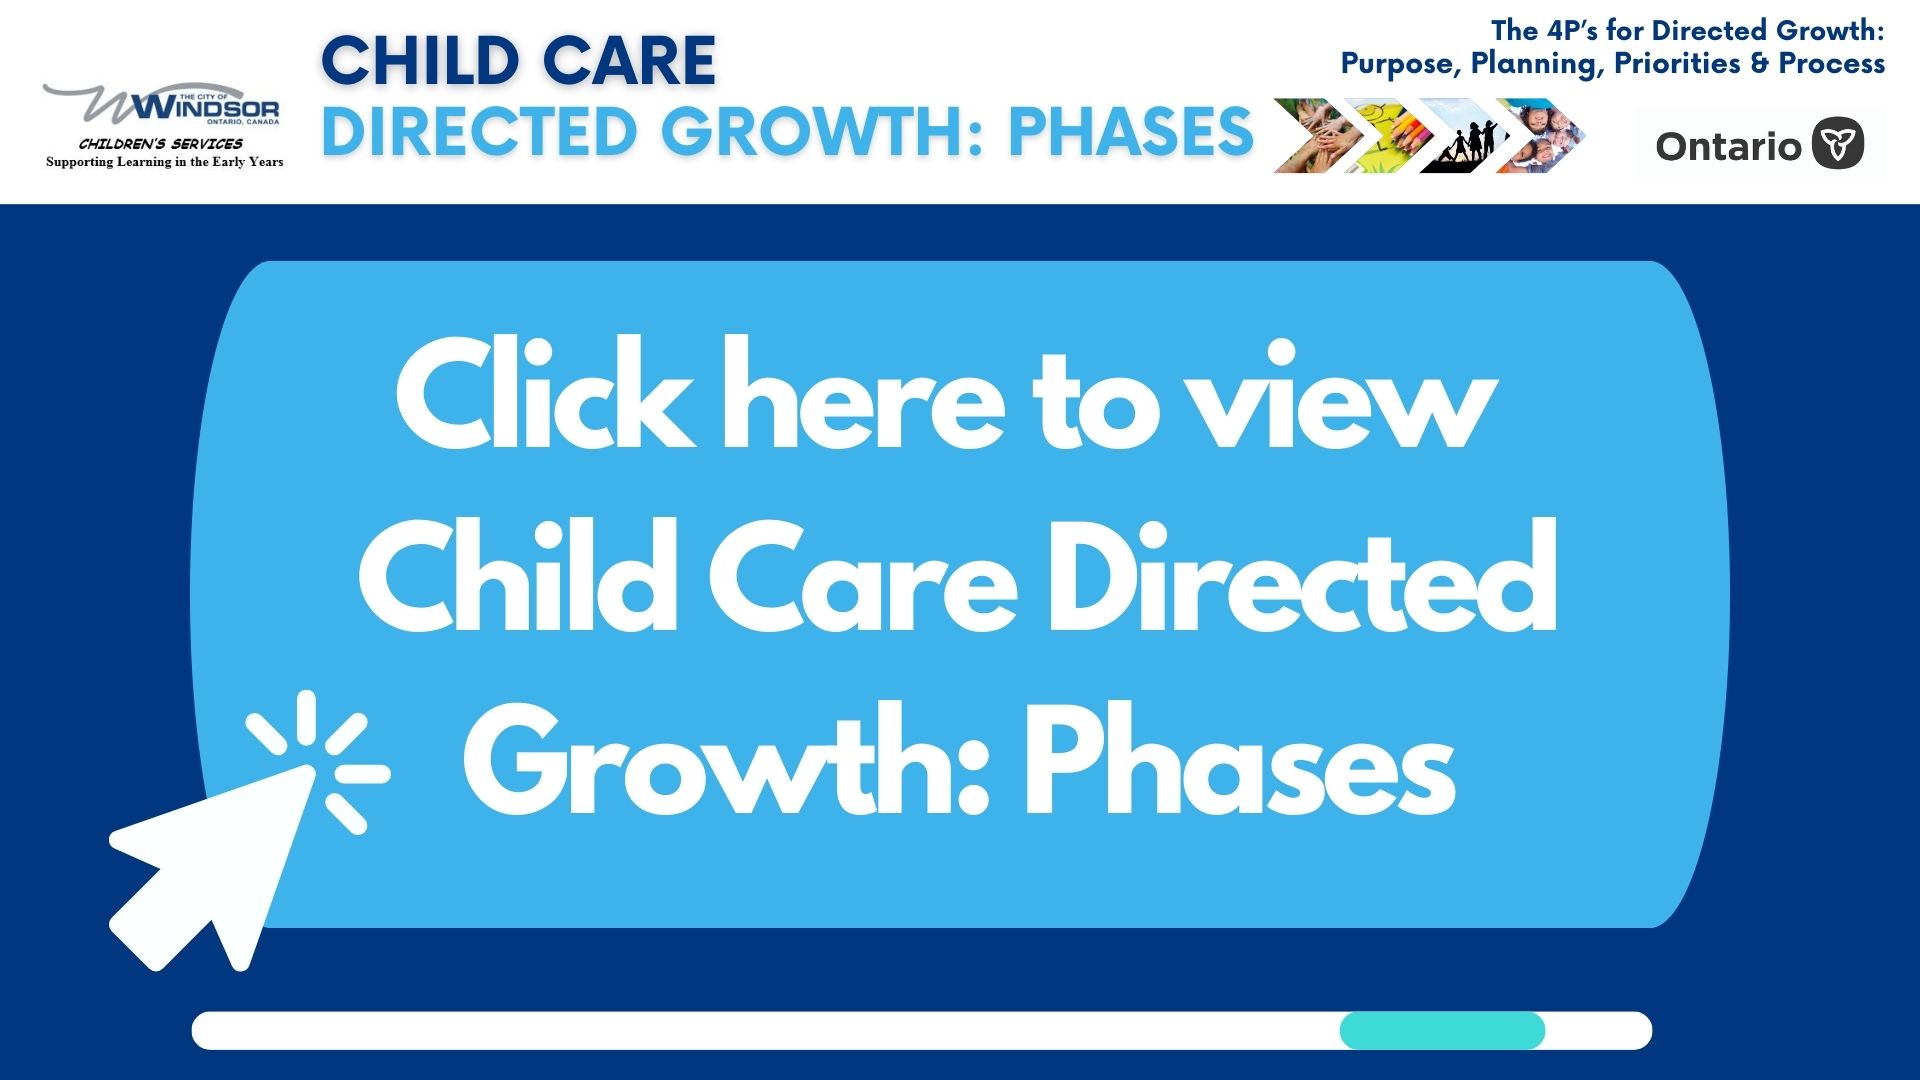 Child Care Directed Growth Phases